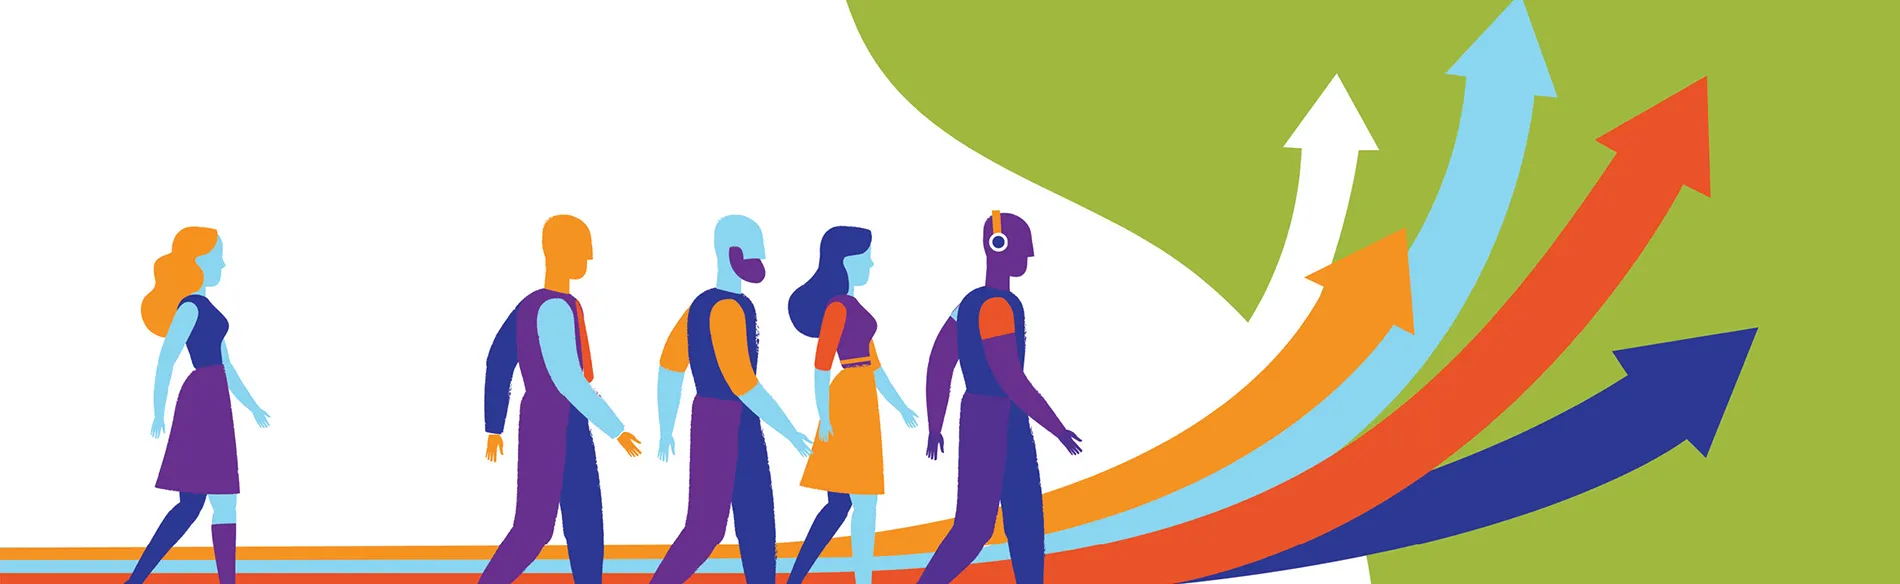 colorful graphic of people walking toward arrows pointing up 